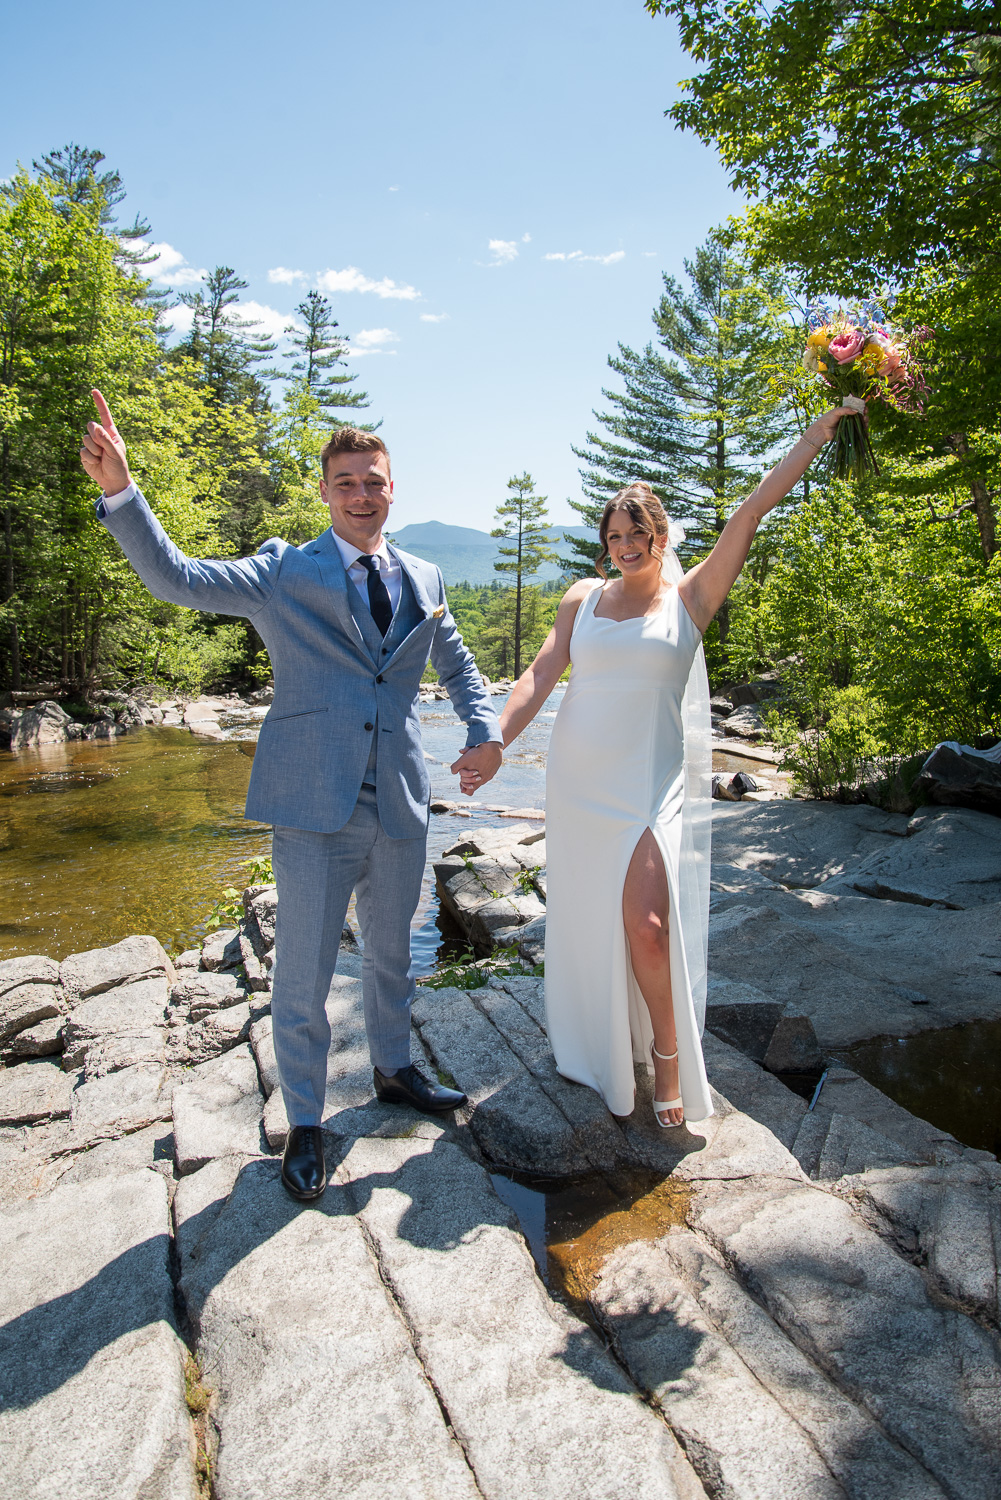 bride and groom posed at Jackson Falls in Jackson, NH before their happily ever after wedding day